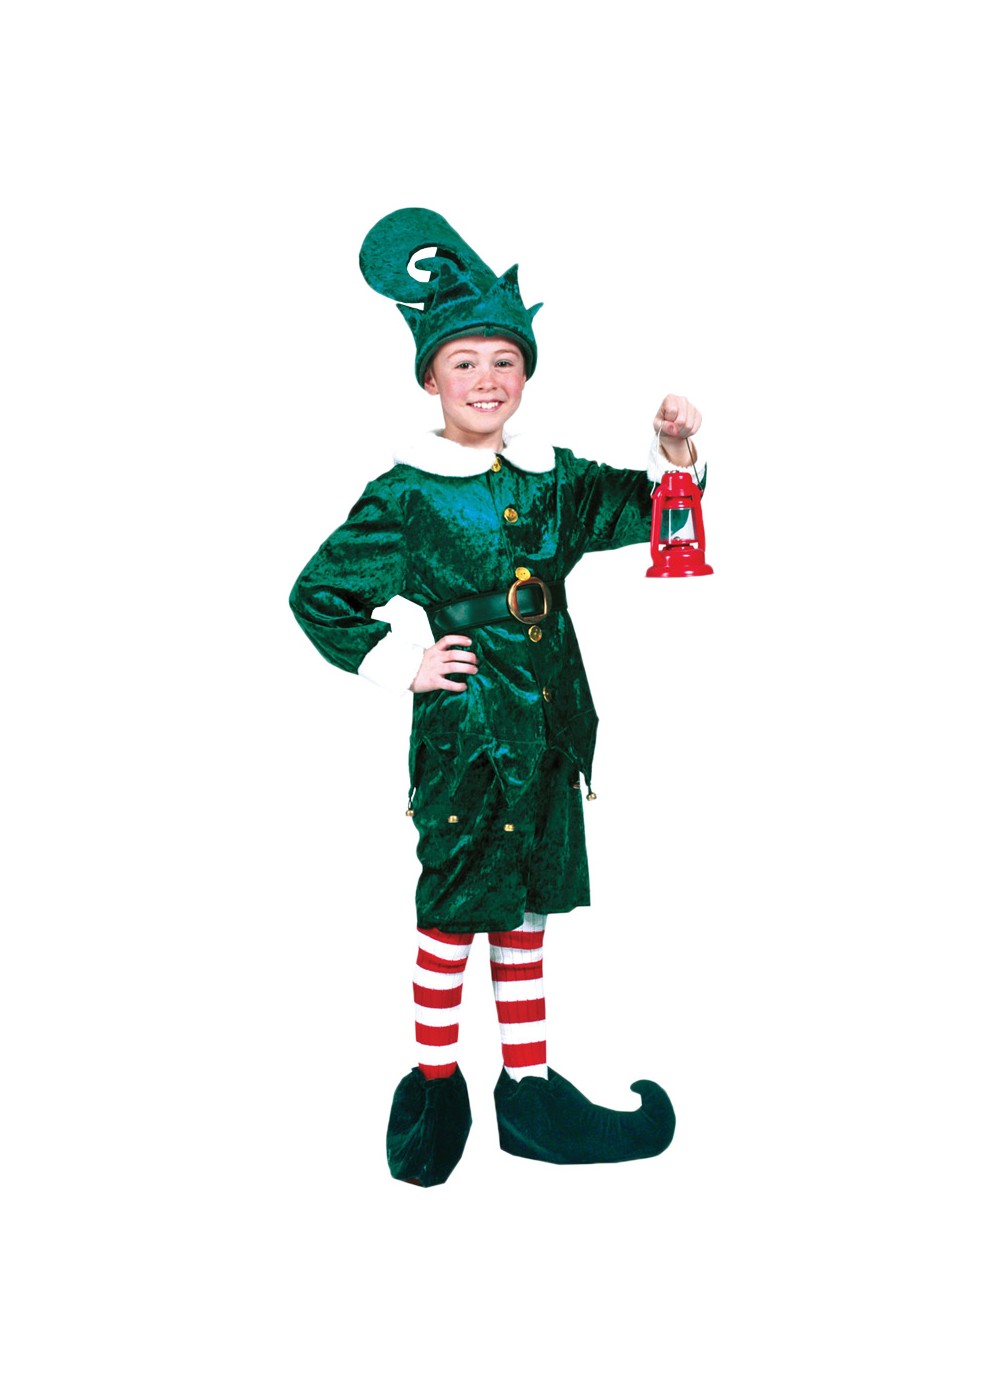 Childs Holly Jolly Elf Costume